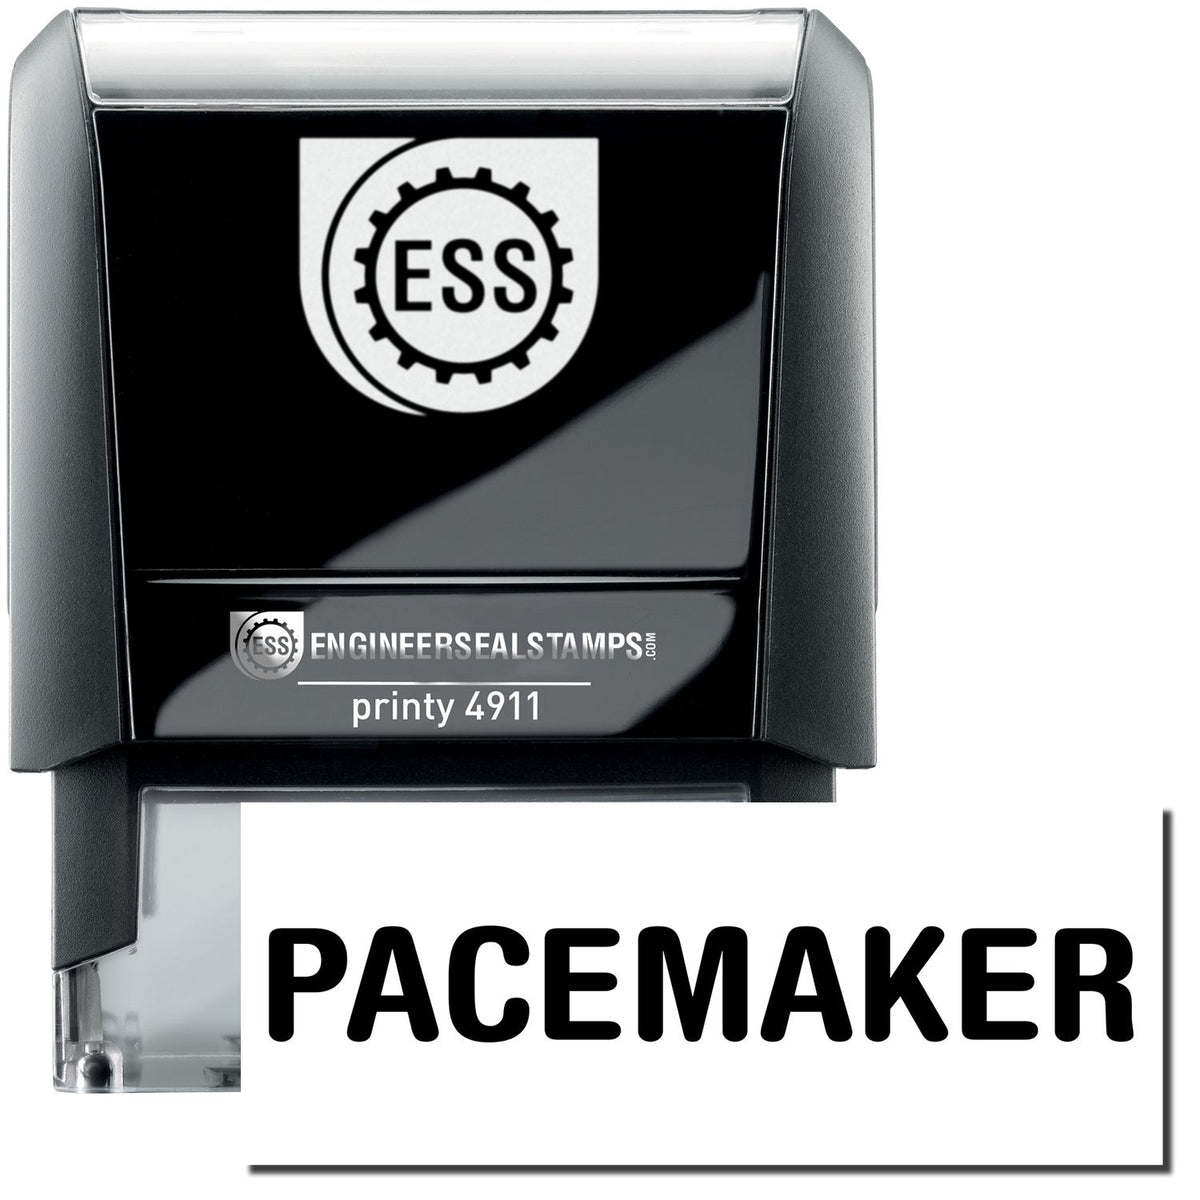 A self-inking stamp with a stamped image showing how the text &quot;PACEMAKER&quot; is displayed after stamping.